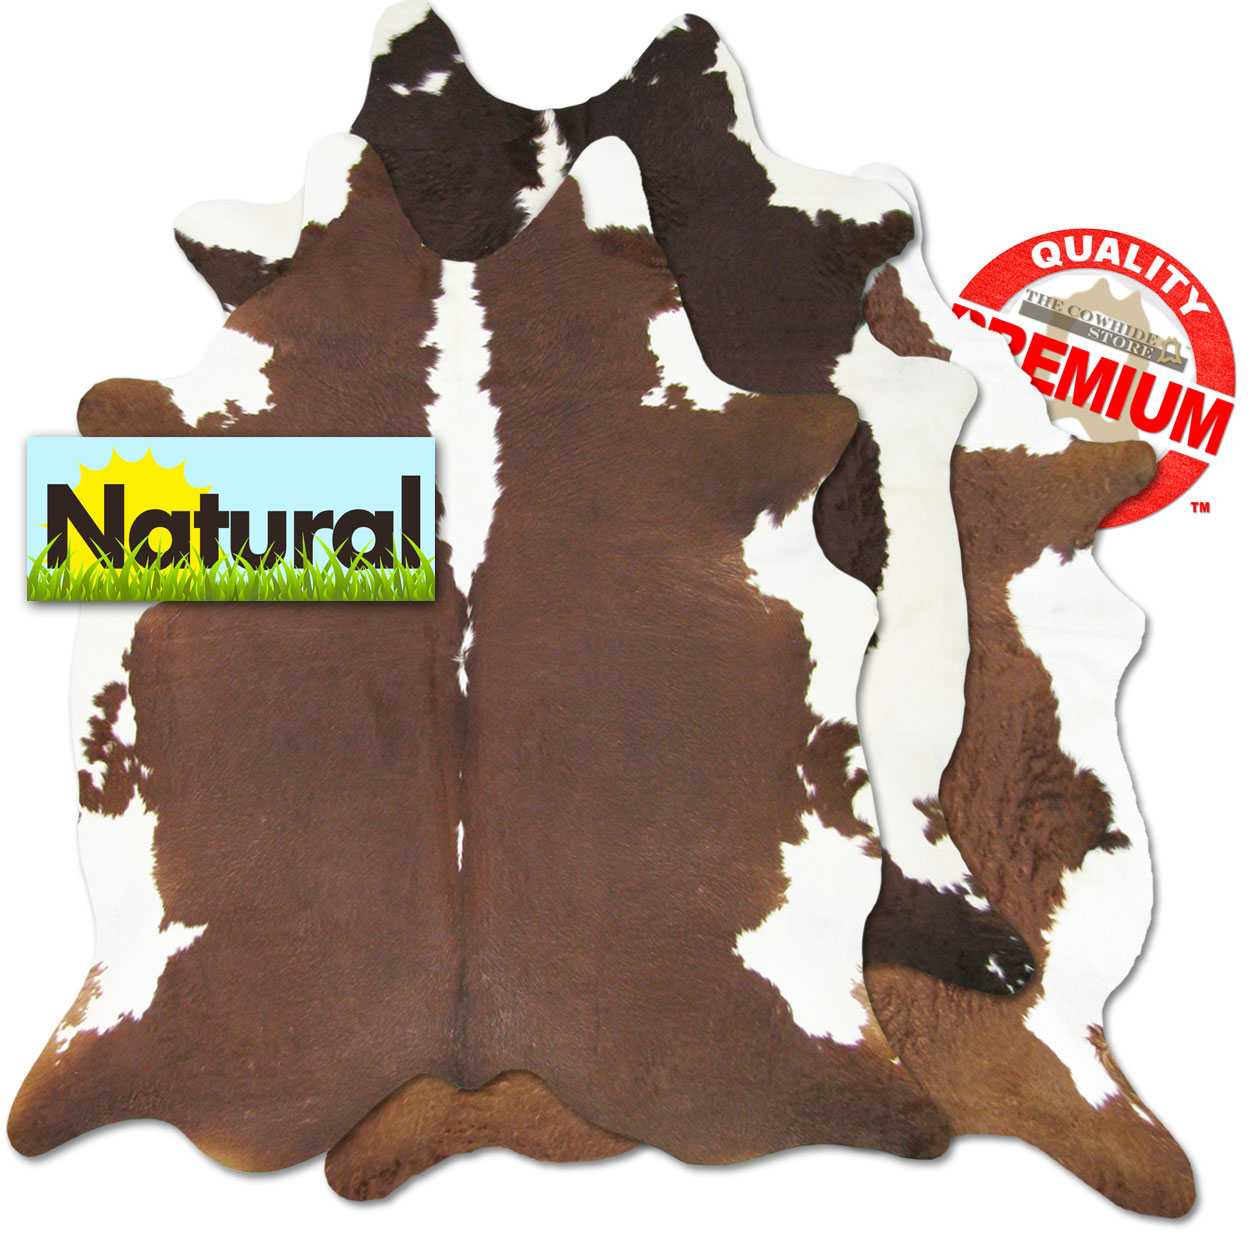 322111 - Premium Grade A Natural Hereford Brown and White Cowhide - Choose Size